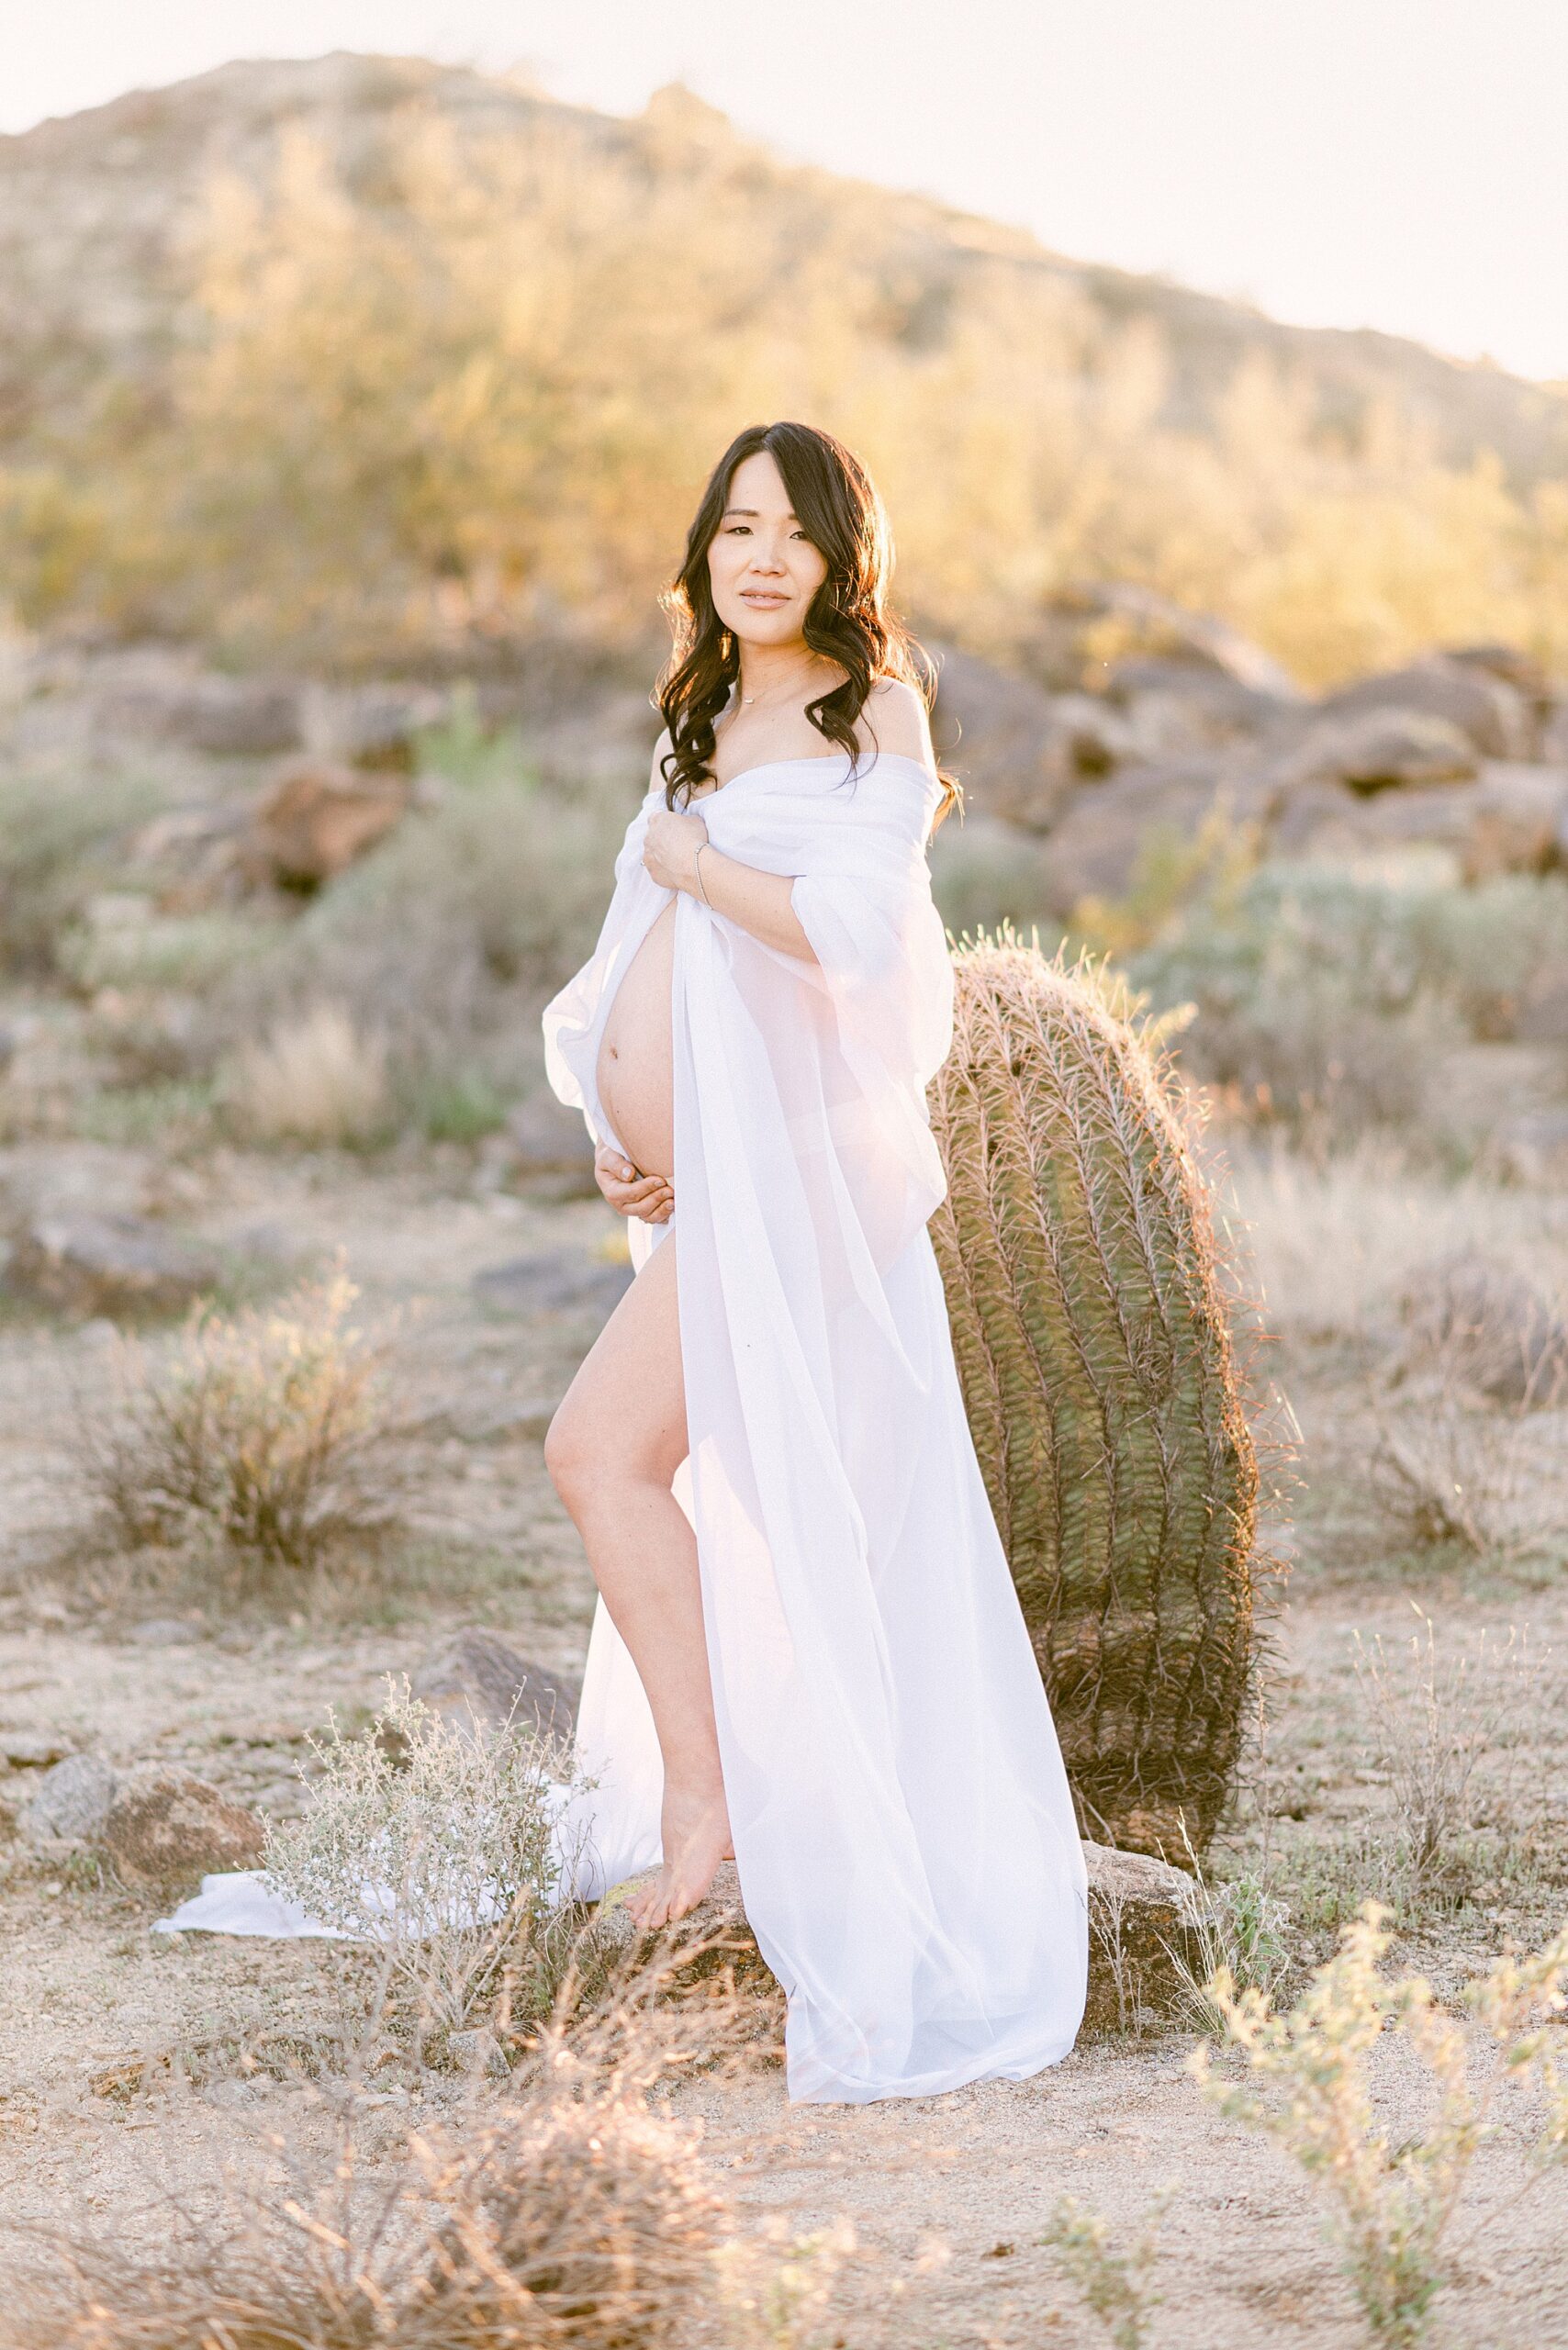 maternity boudoir with chiffon maternity draping fabric with baby bump showing. Pregnant woman is standing next to cactus